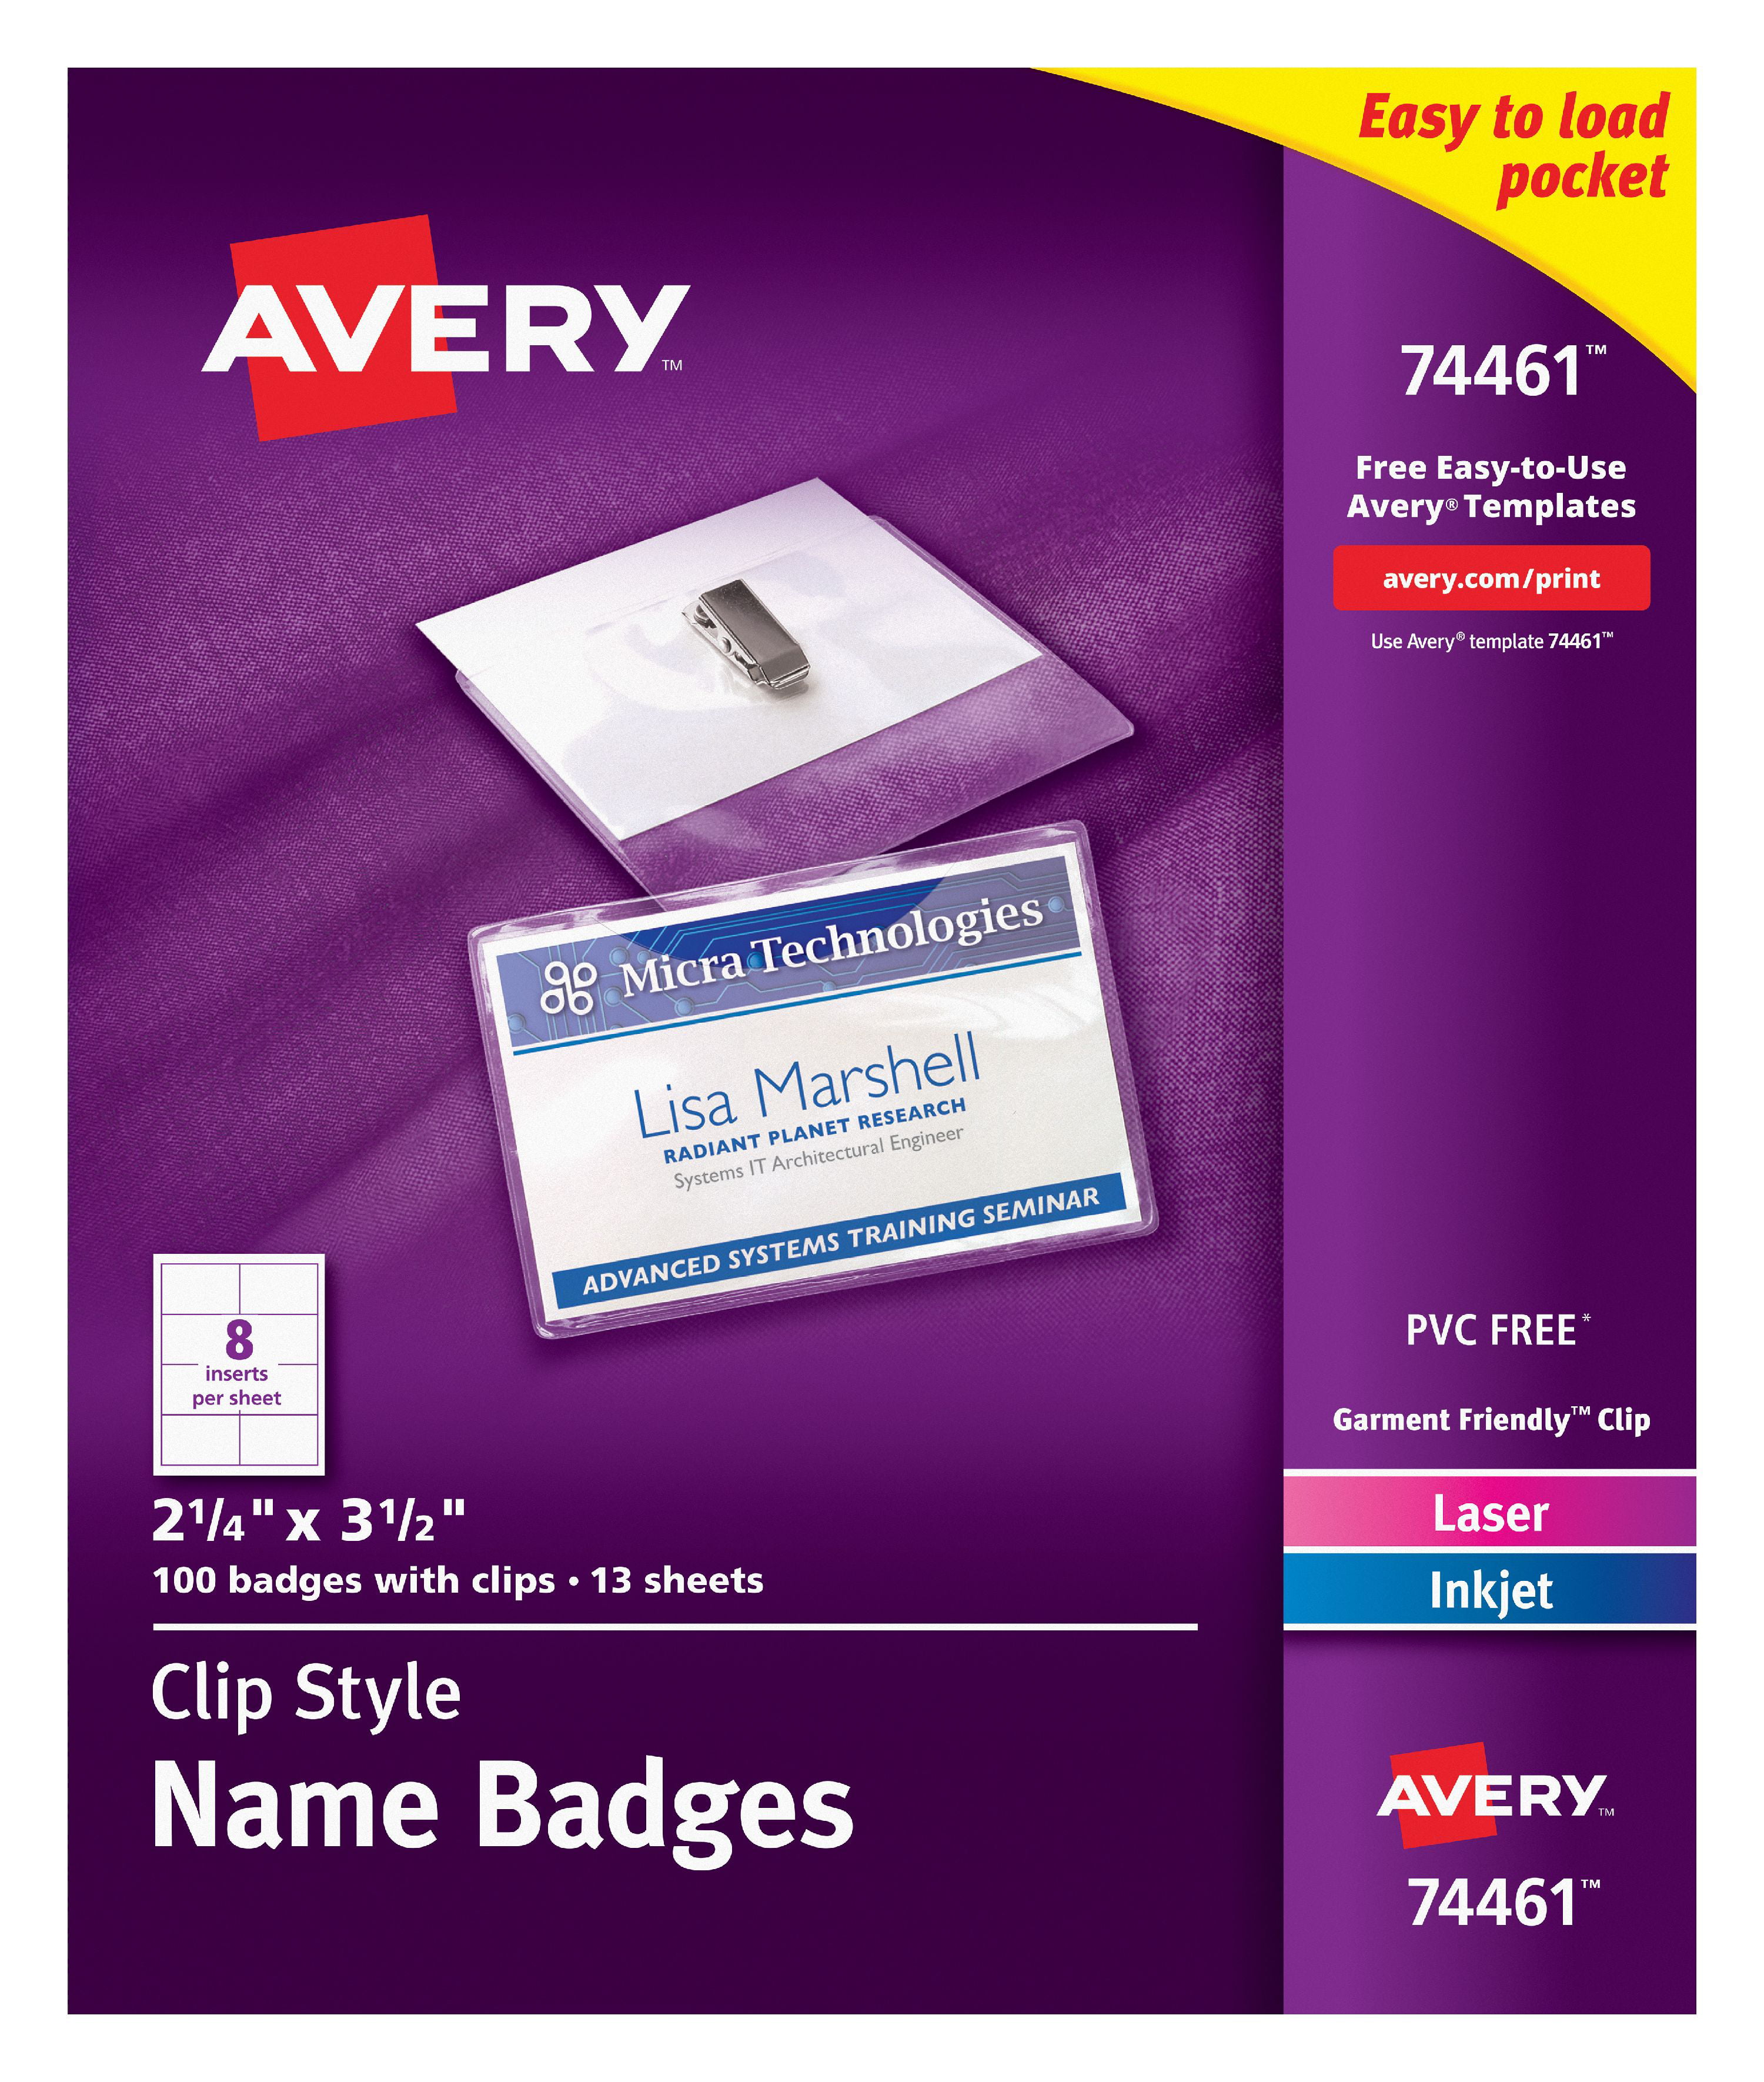 Avery Clip Style Name Badges, 21/4" x 31/2", 100 Badges (74461